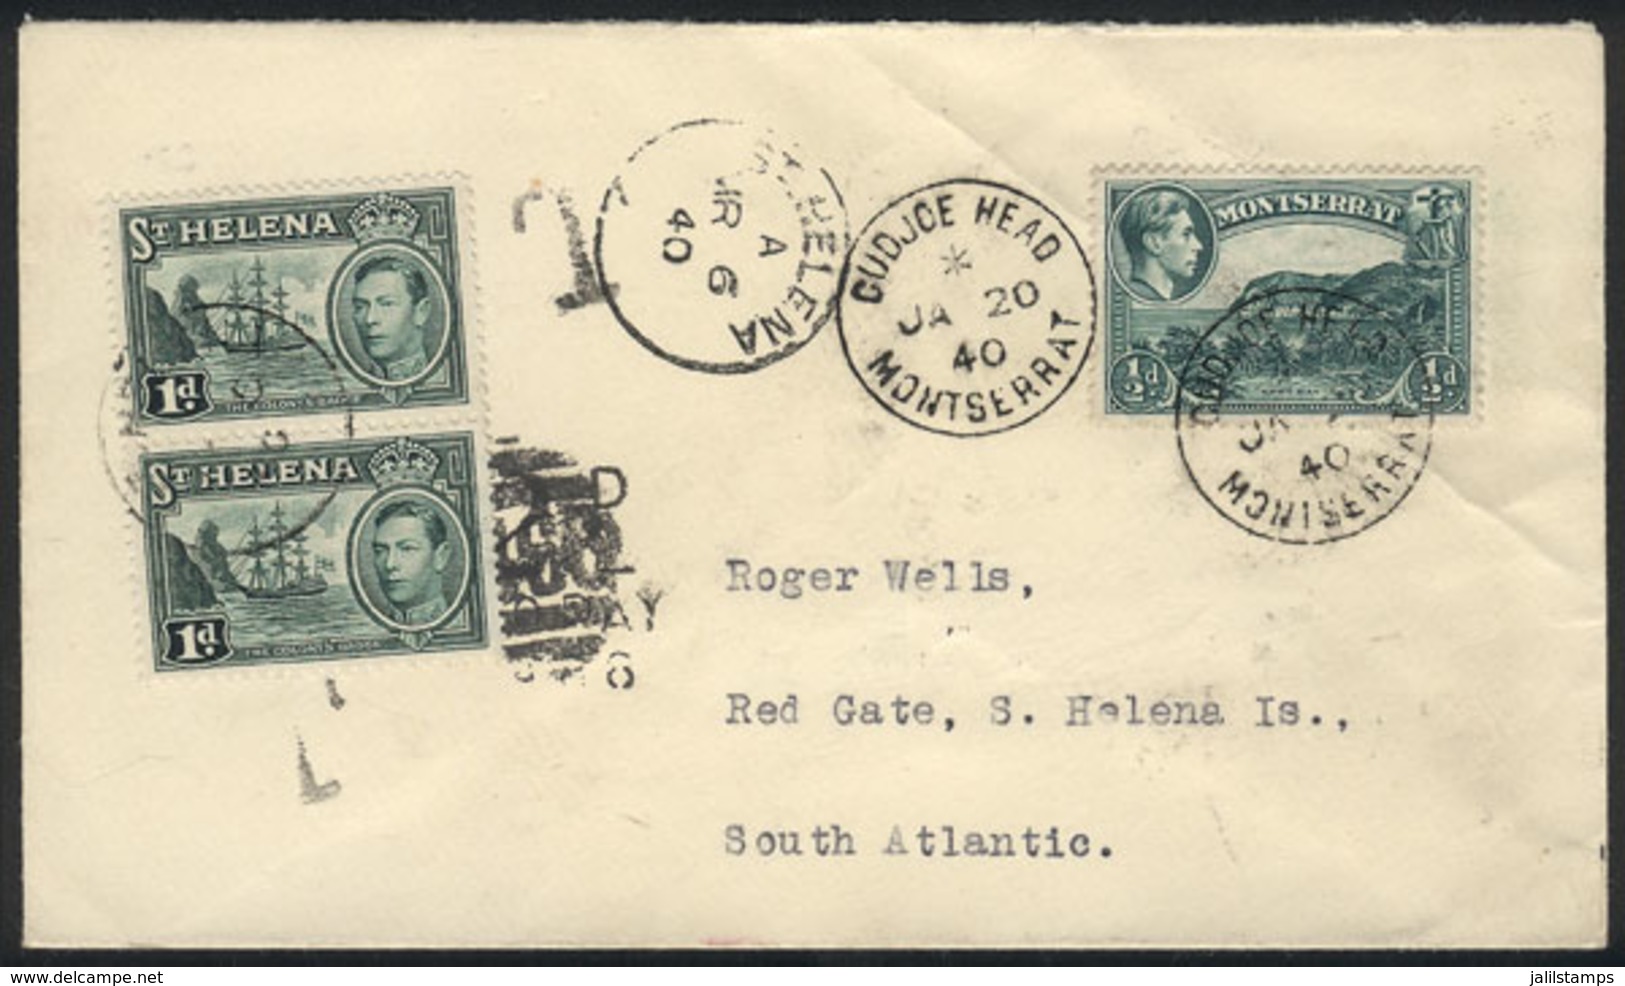 SAINT HELENA: Stamps Used As POSTAGE DUE STAMPS: Cover Sent From Gudjoe Head (Montserrat) To Red Gate, Saint Helena, On  - Sainte-Hélène